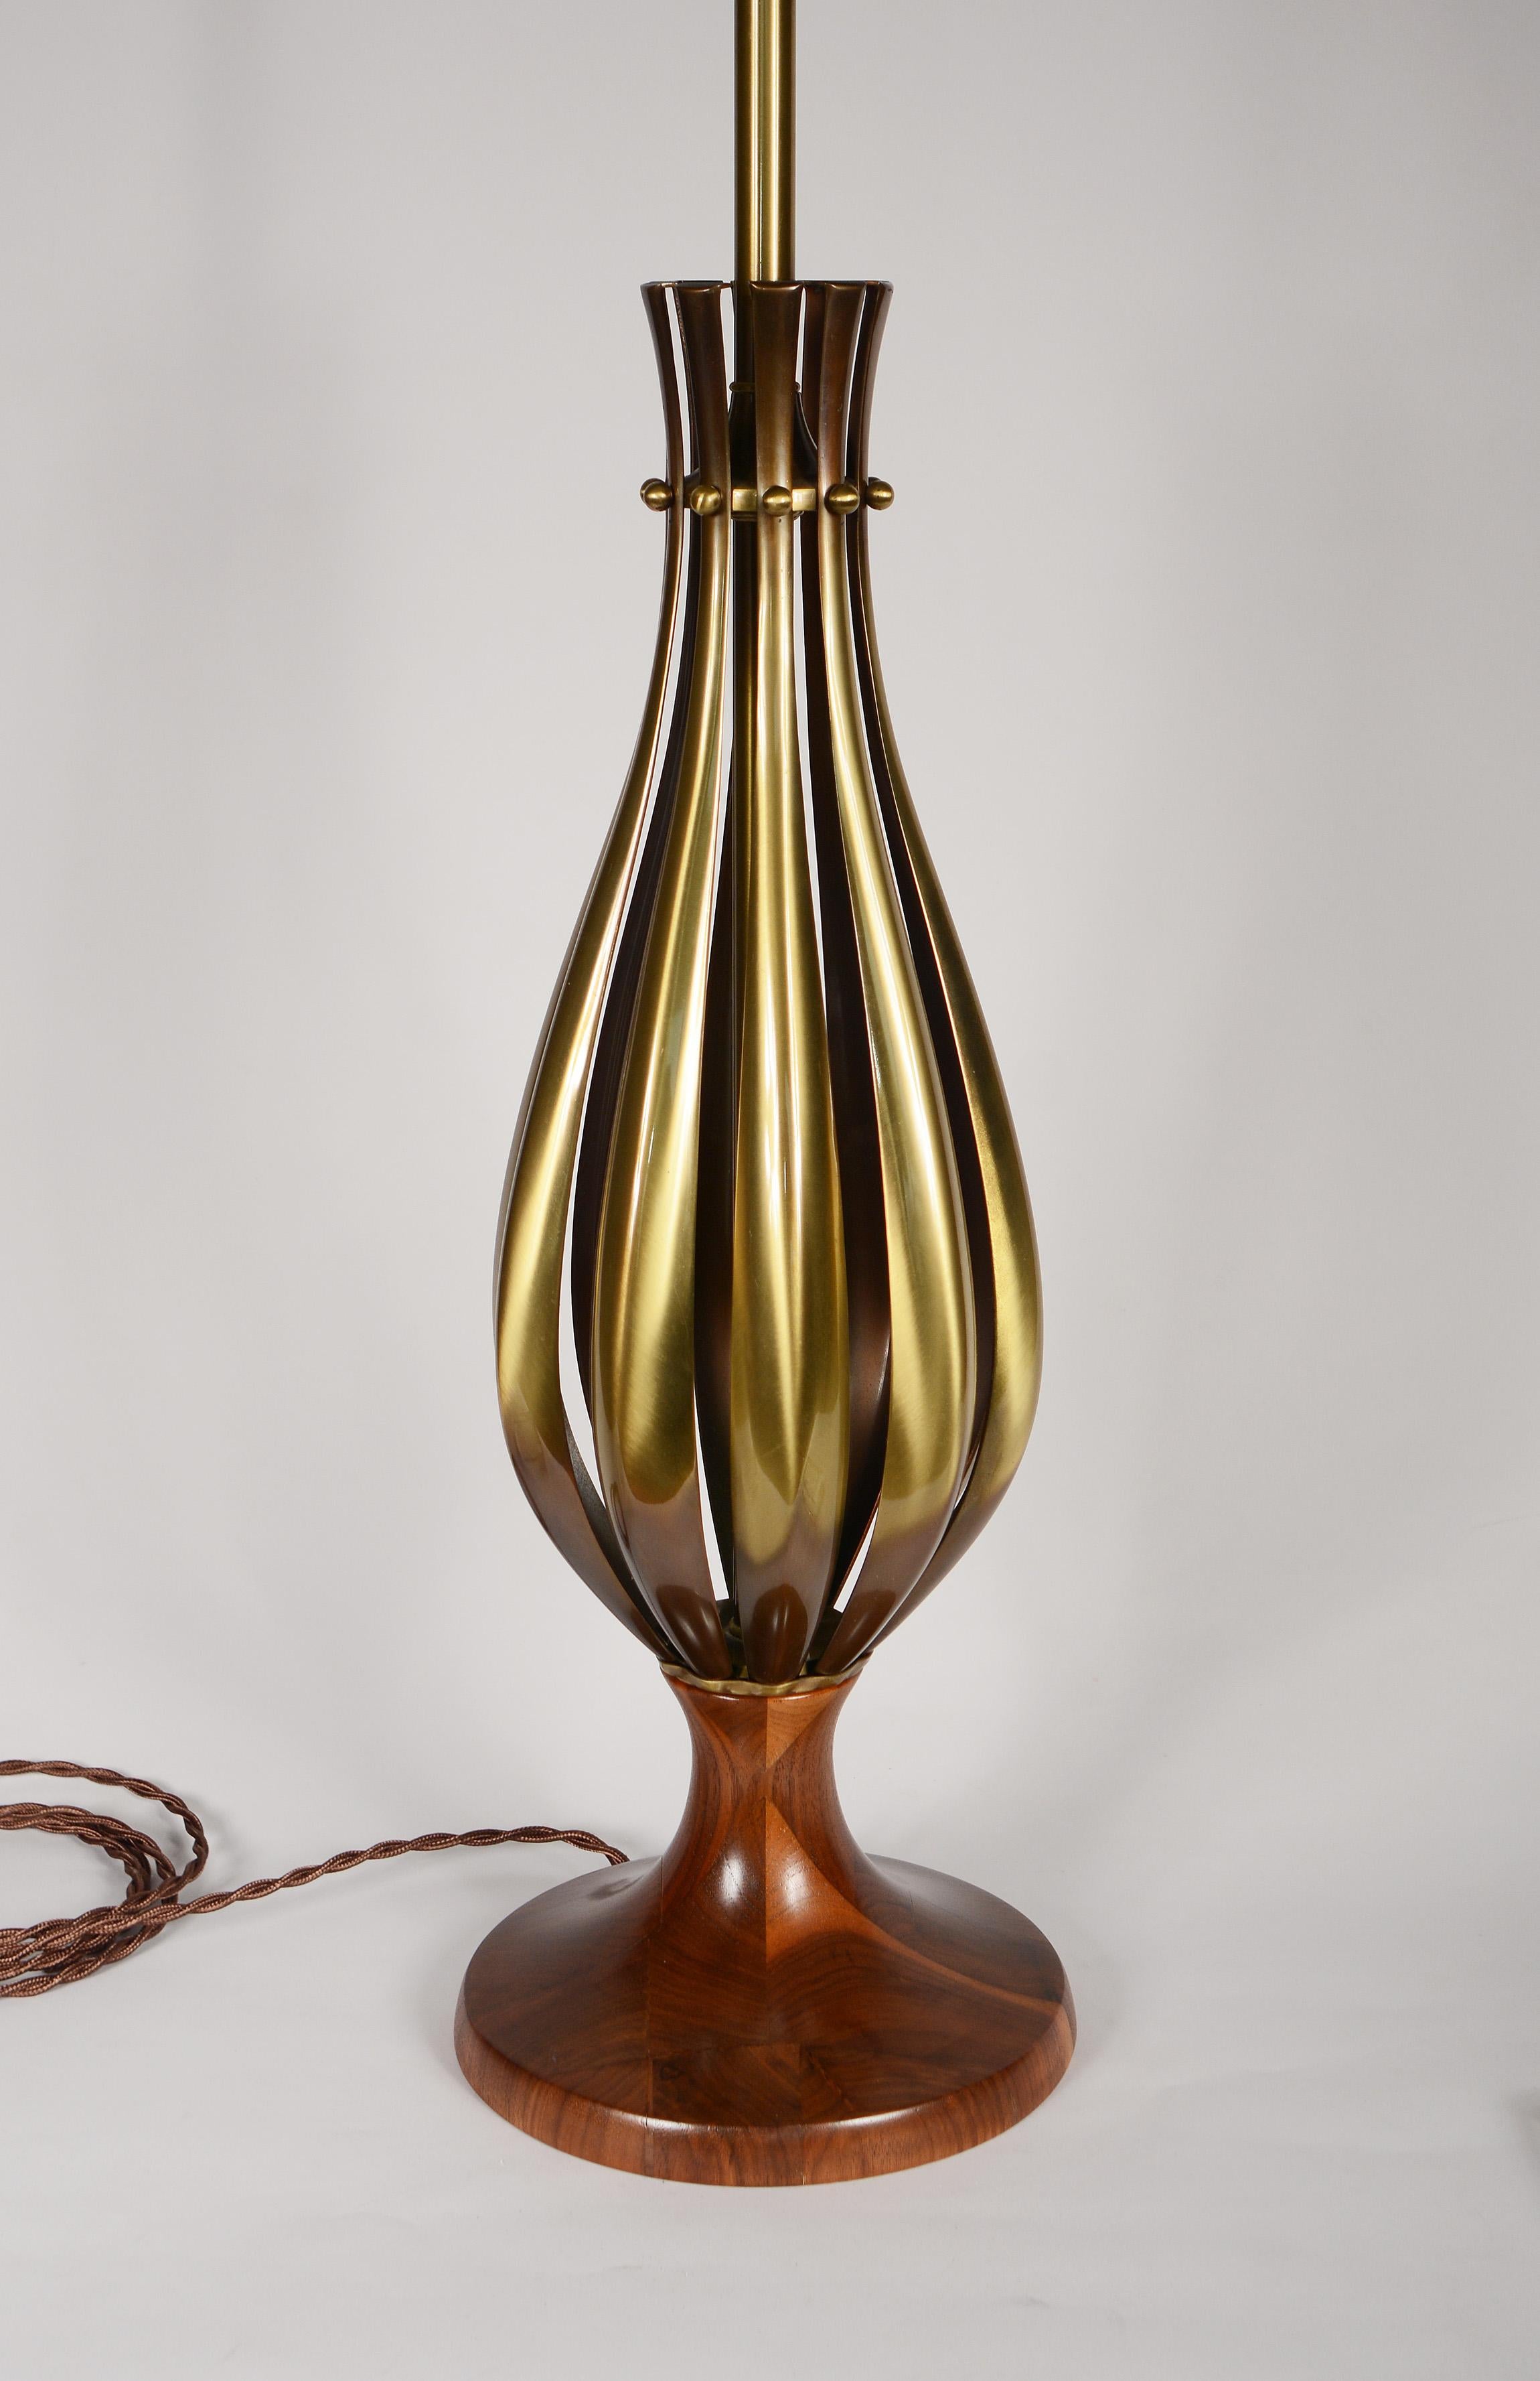 Rembrandt tulip form table lamp with brass ribs and a walnut base. This lamp has a three way switch at the socket and a second switch on the base that will turn the lamp on and off.